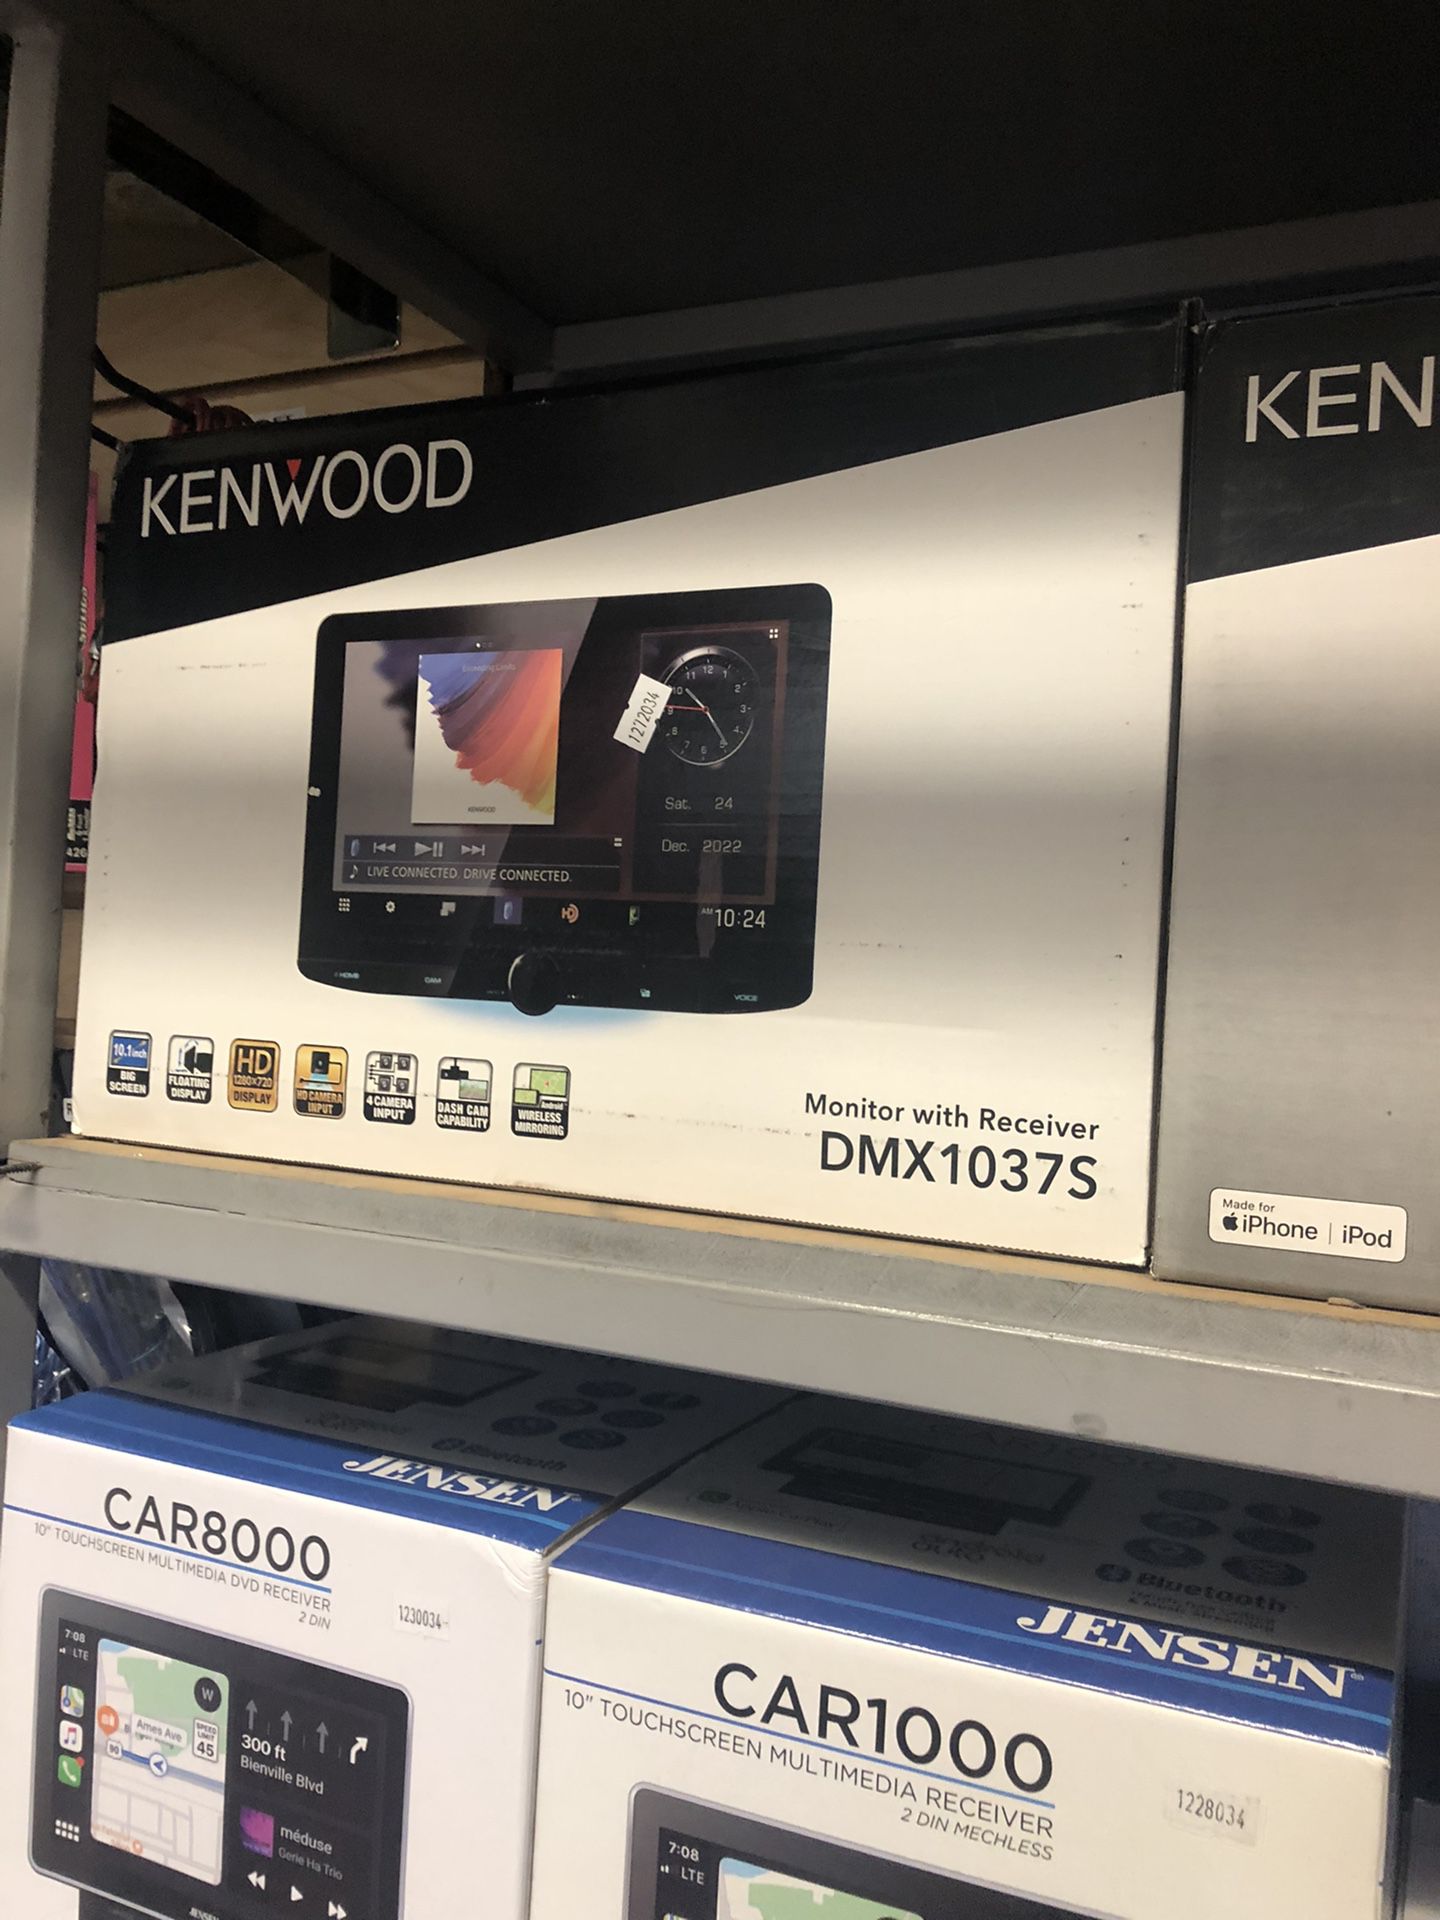 Kenwood Dmx1037s On Sale Today For 899